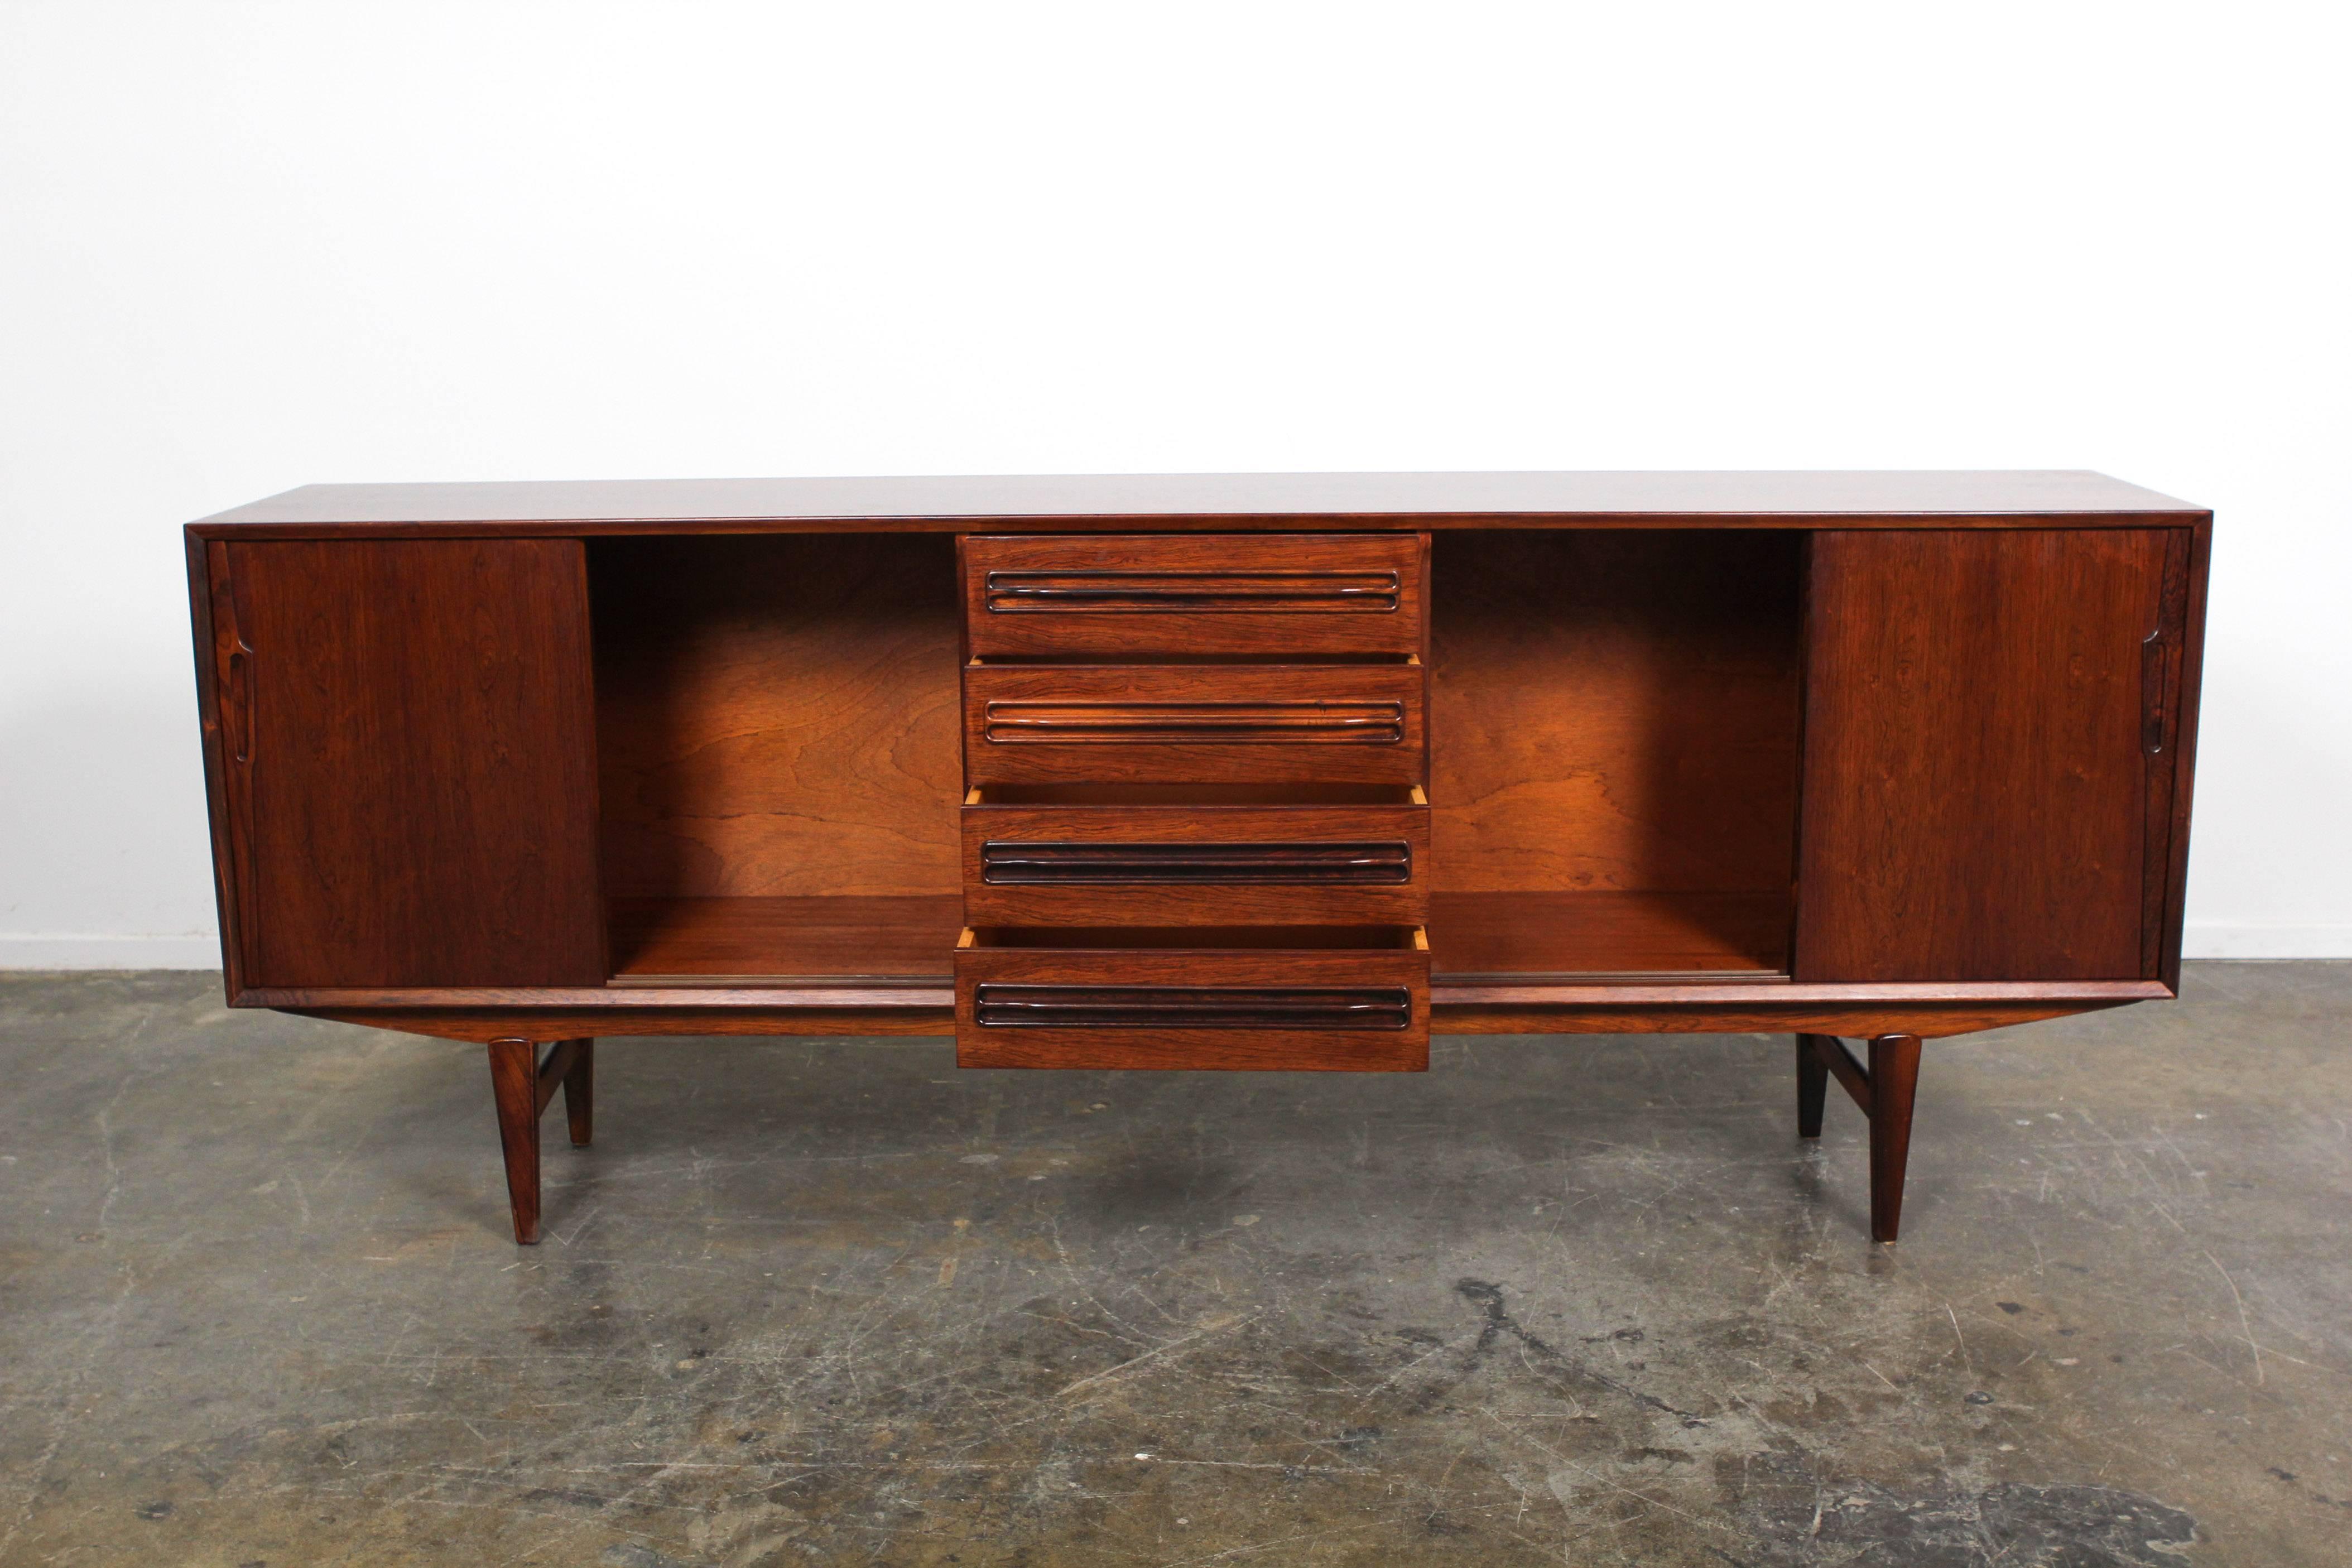 Danish Mid-Century Modern long, low rosewood sideboard designed by Jens Ærthøj and produced by Ærthøj Jensen & Mølholm. Piece has four centre drawers and four sliding doors with sculptural handles and pulls. Newly refinished in lacquer.